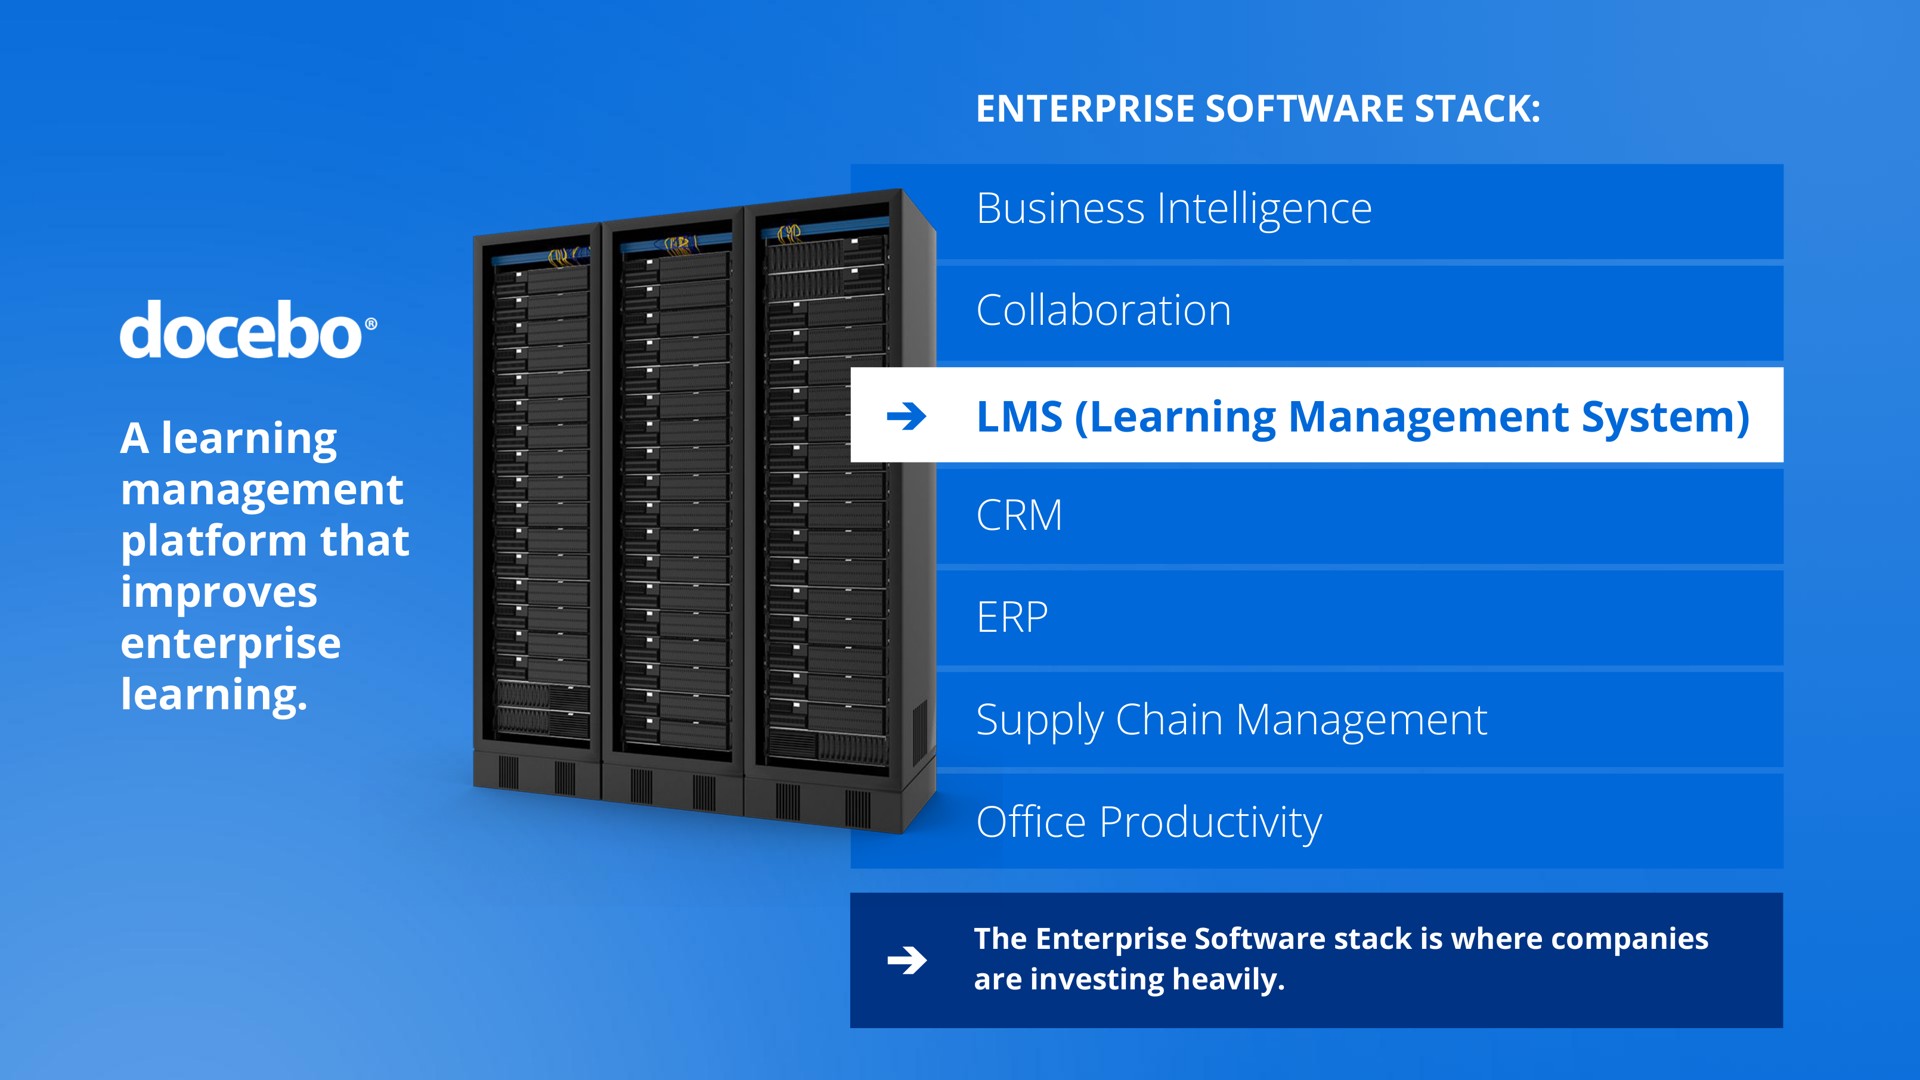 a learning management platform that improves enterprise learning business intelligence collaboration learning management system supply chain management productivity ante office | Docebo